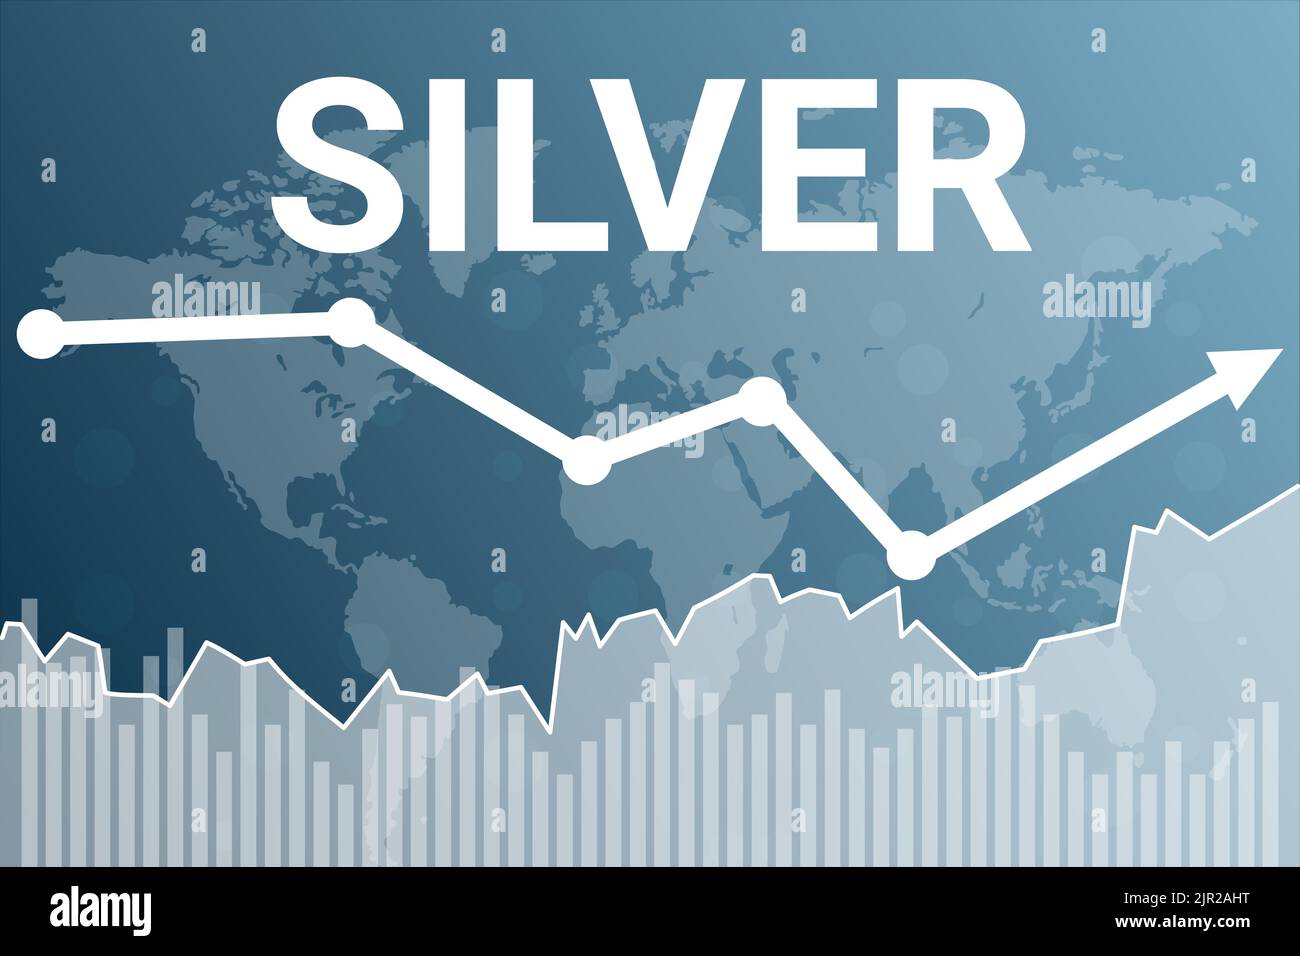 Silver metal price on stock market graph on blue finance background Stock Vector